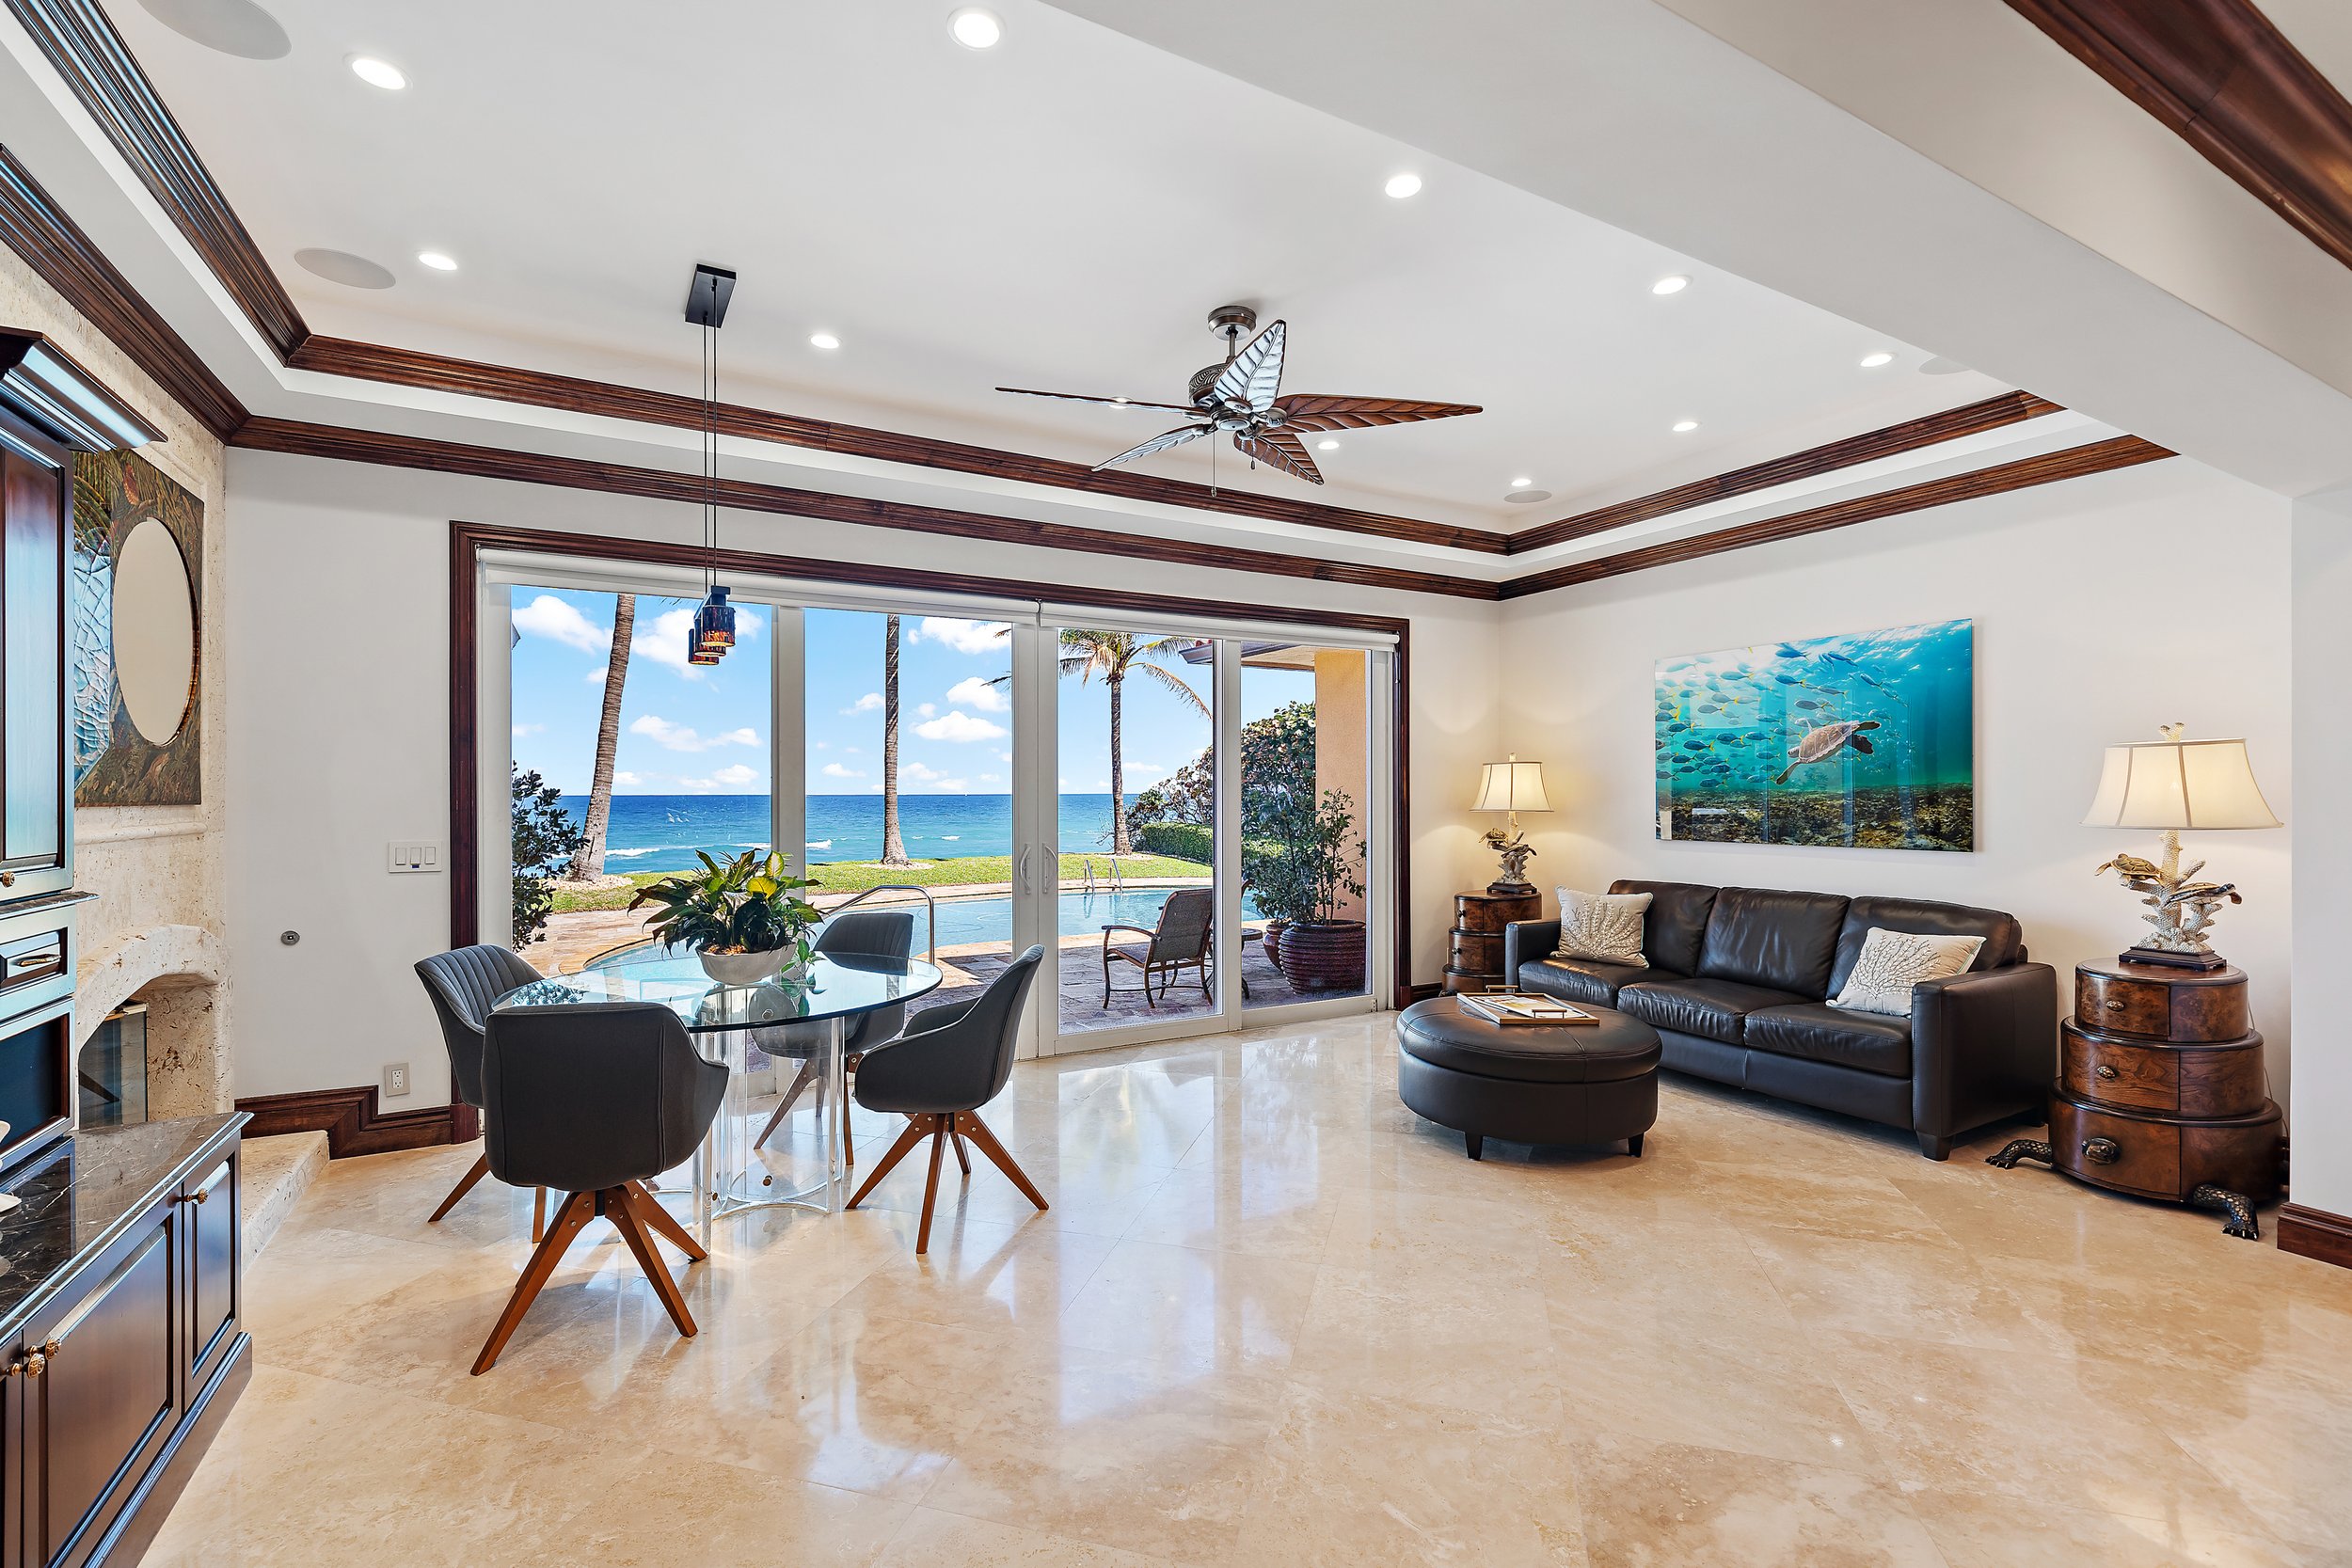 Tour A Jupiter Beachfront Mansion Owned By Clyde R. %22Buzz%22 Gibb Which Is Asking $24.9 Million 116.jpg